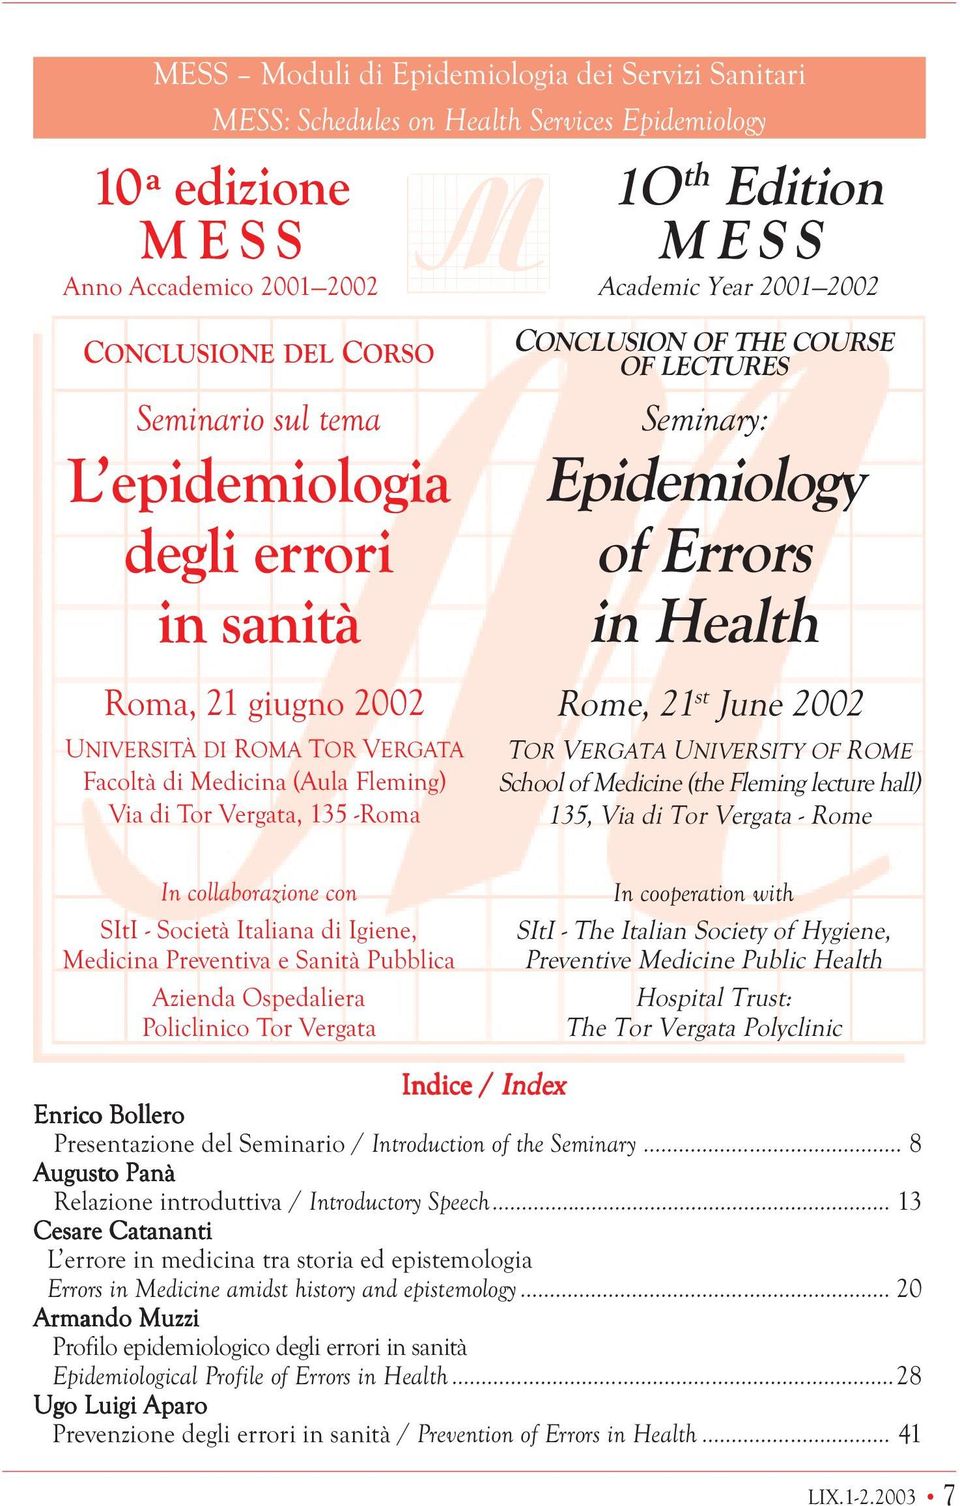 THE COURSE OF LECTURES Seminary: Epidemiology of Errors in Health Rome, 21 st June 2002 TOR VERGATA UNIVERSITY OF ROME School of Medicine (the Fleming lecture hall) 135, Via di Tor Vergata - Rome In